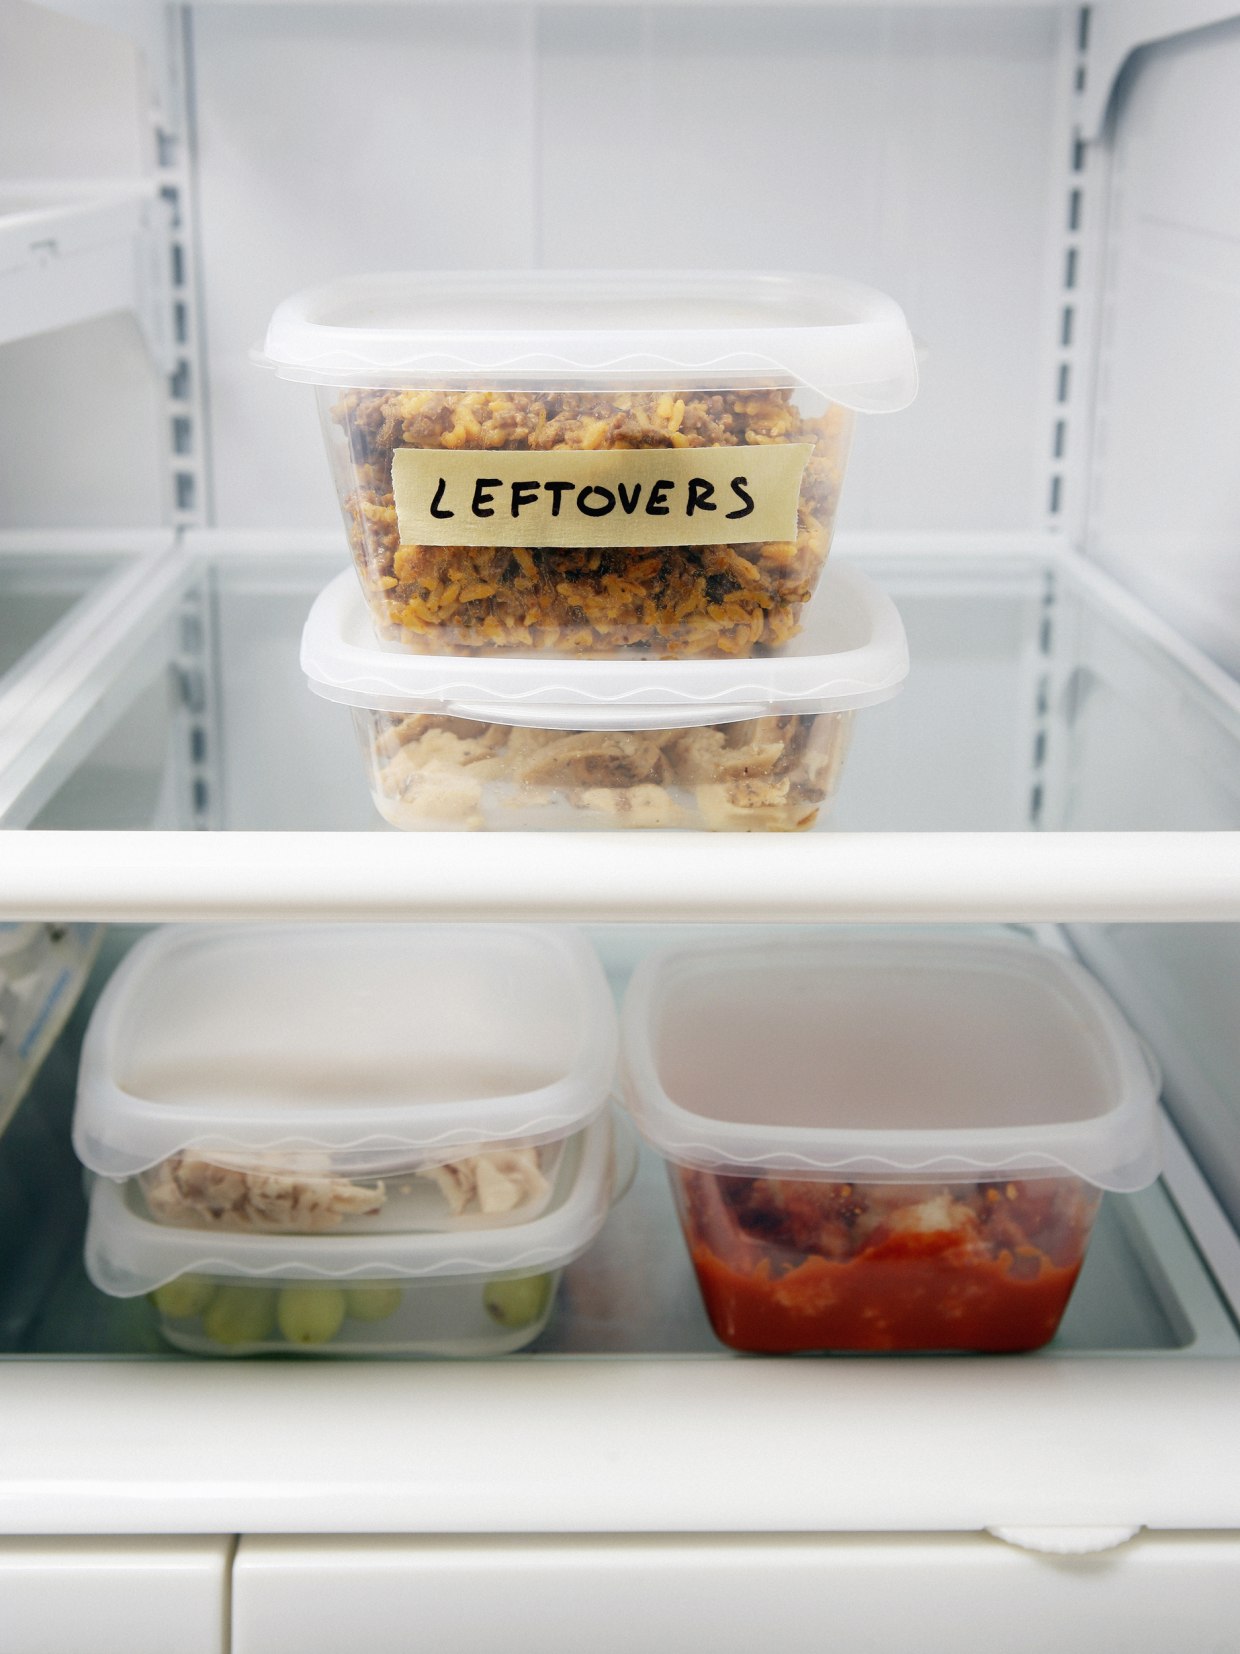 How Long Does Cooked Meat Last in the Fridge? Food Storage Advice